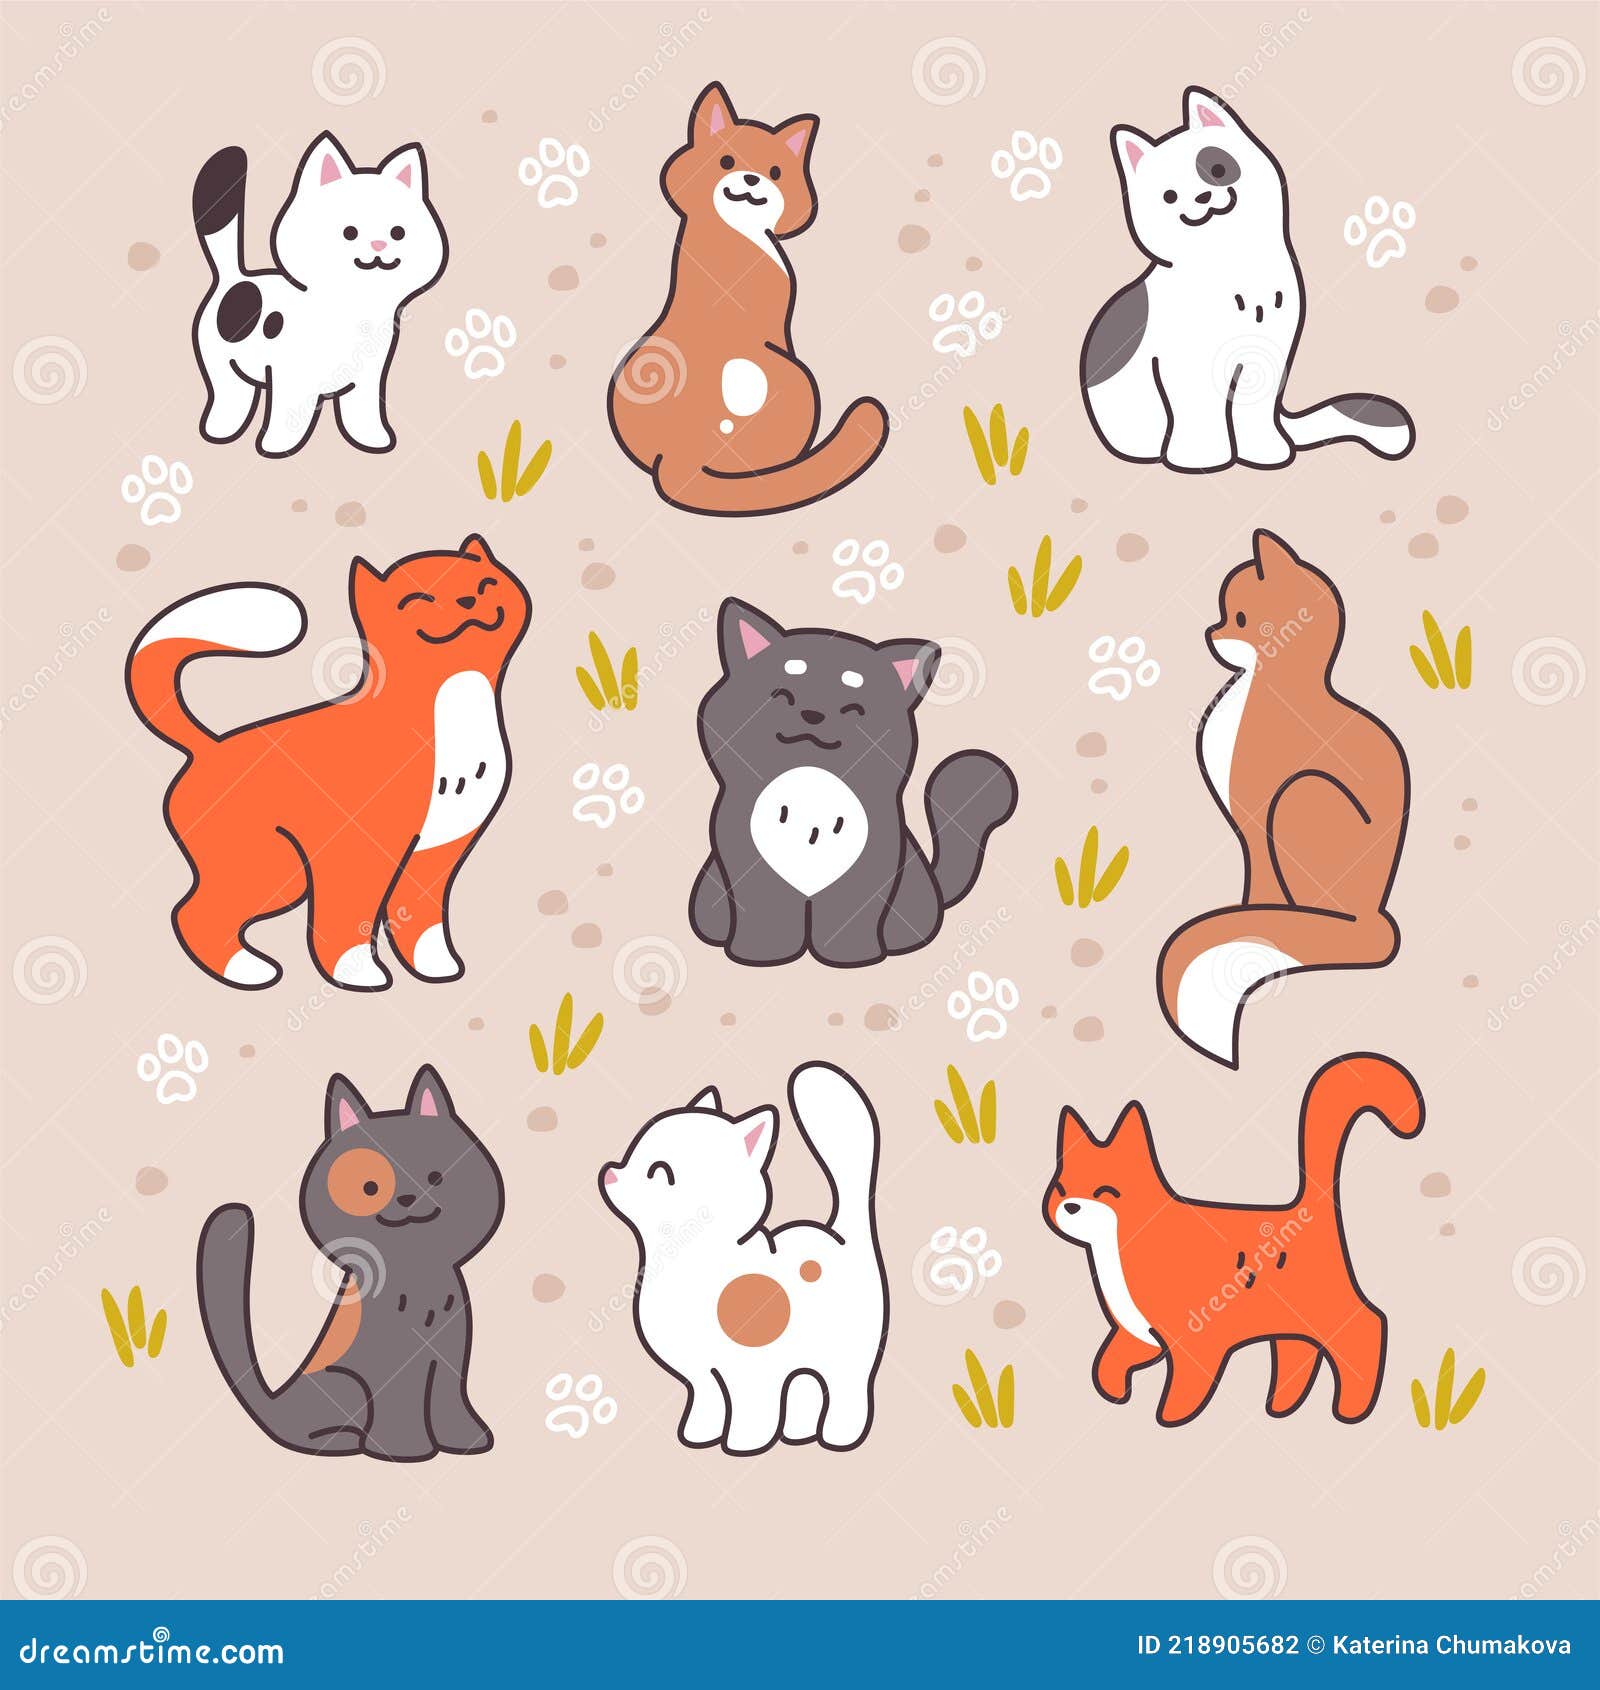 cinnamoroll cat icon  Cat icon, Funny looking cats, Cat stands